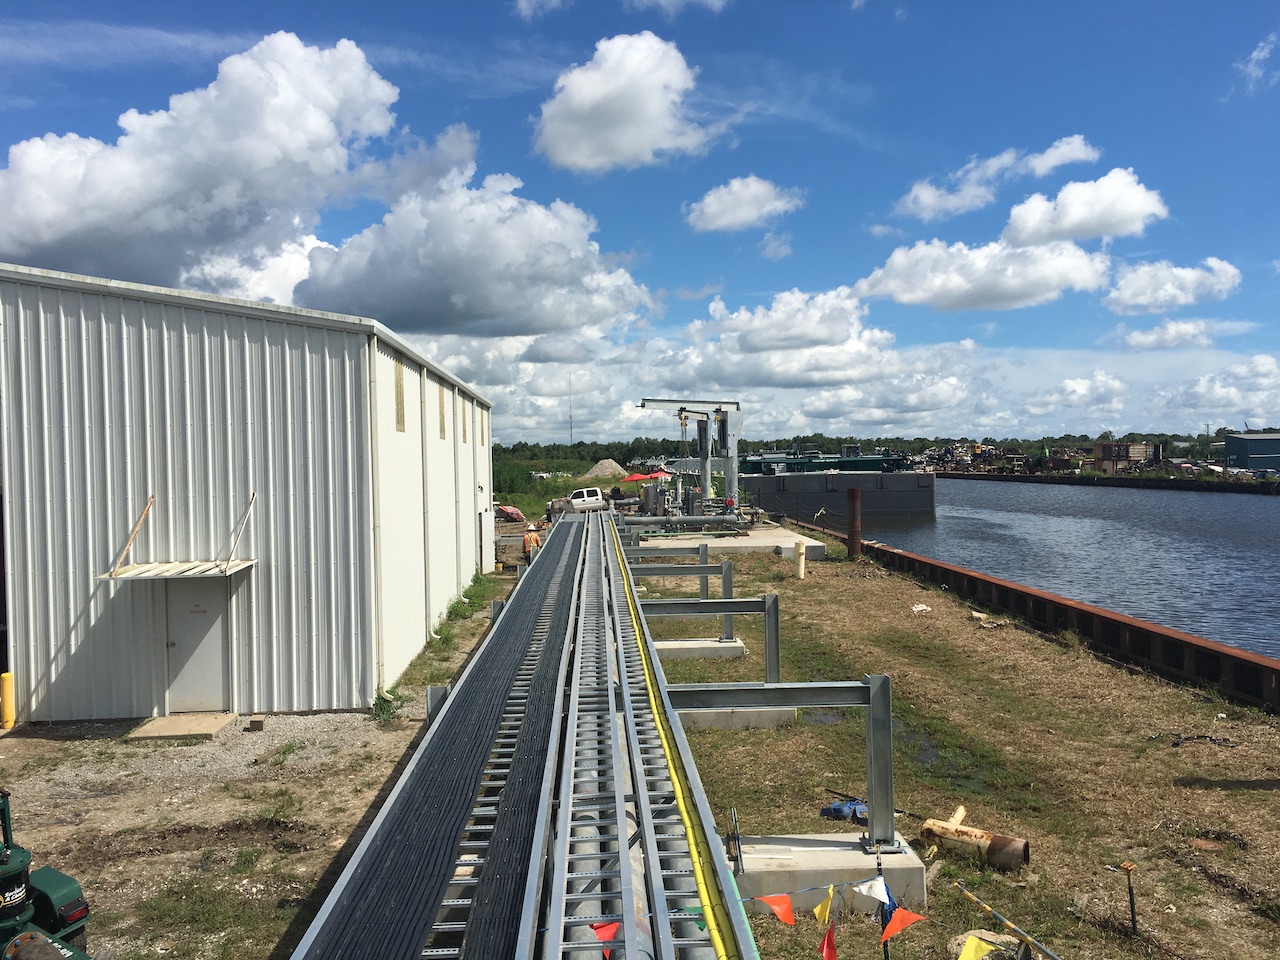 NGL – Barge Unloading Terminal Project - 2 